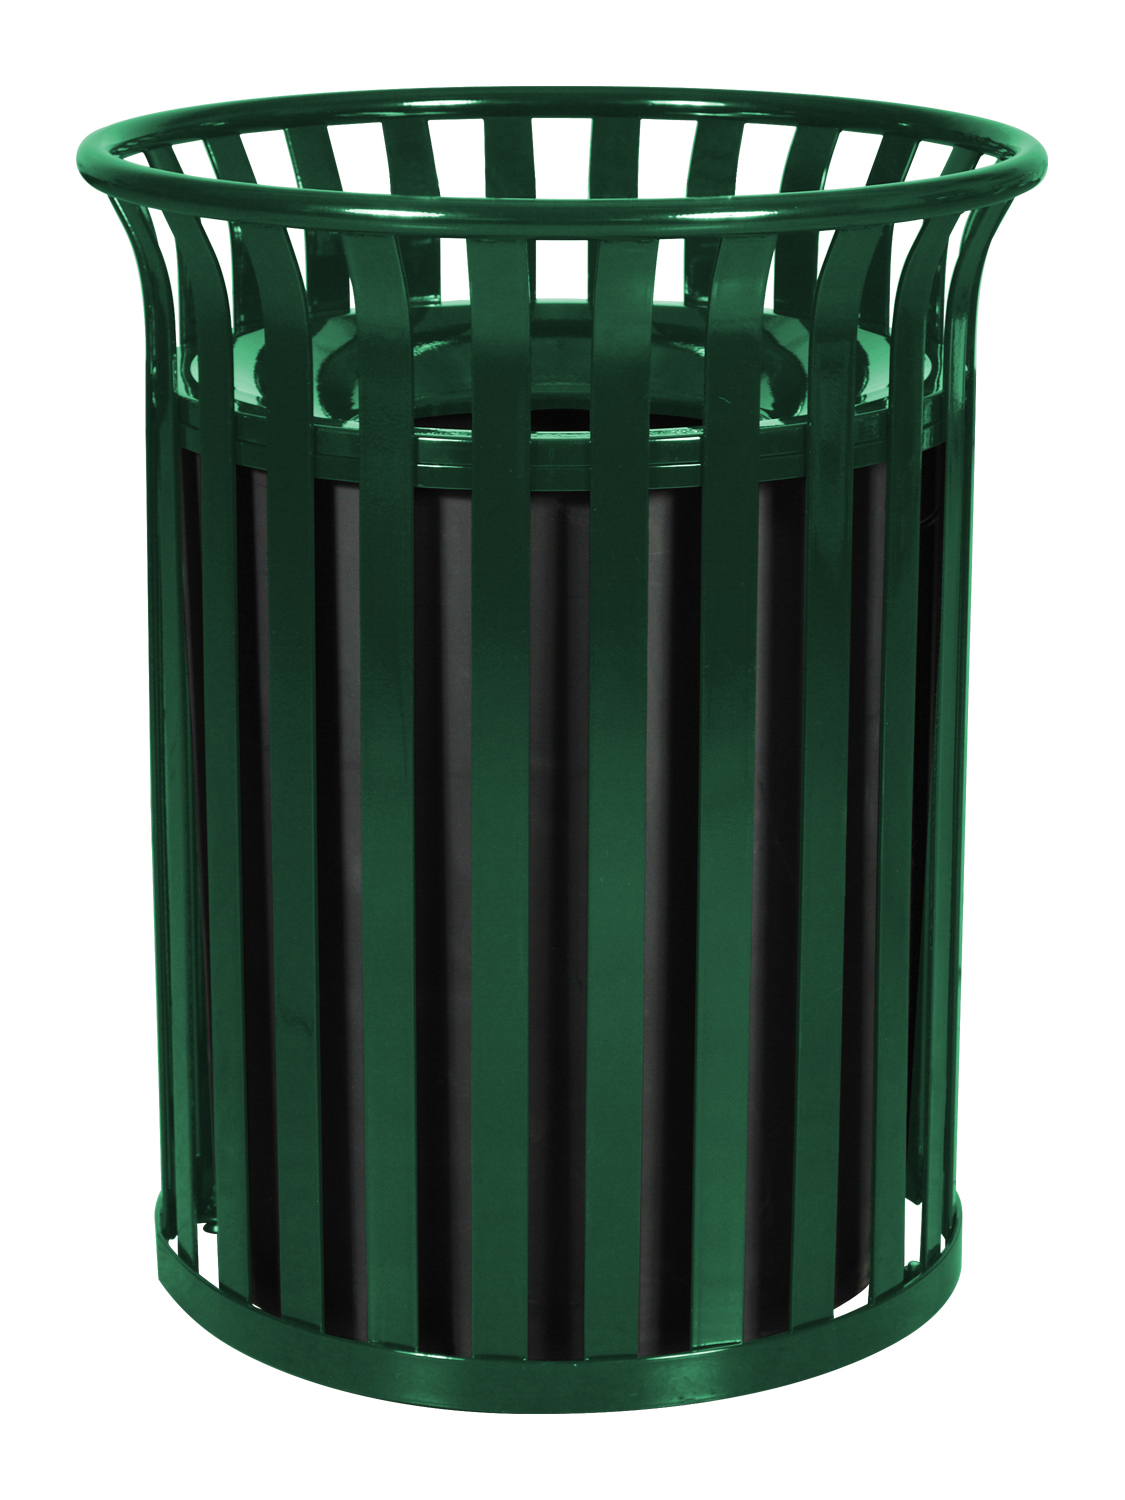 36 GAL STREETSCAPE OUTDOOR TRASH RECEPTACLE - GREEN